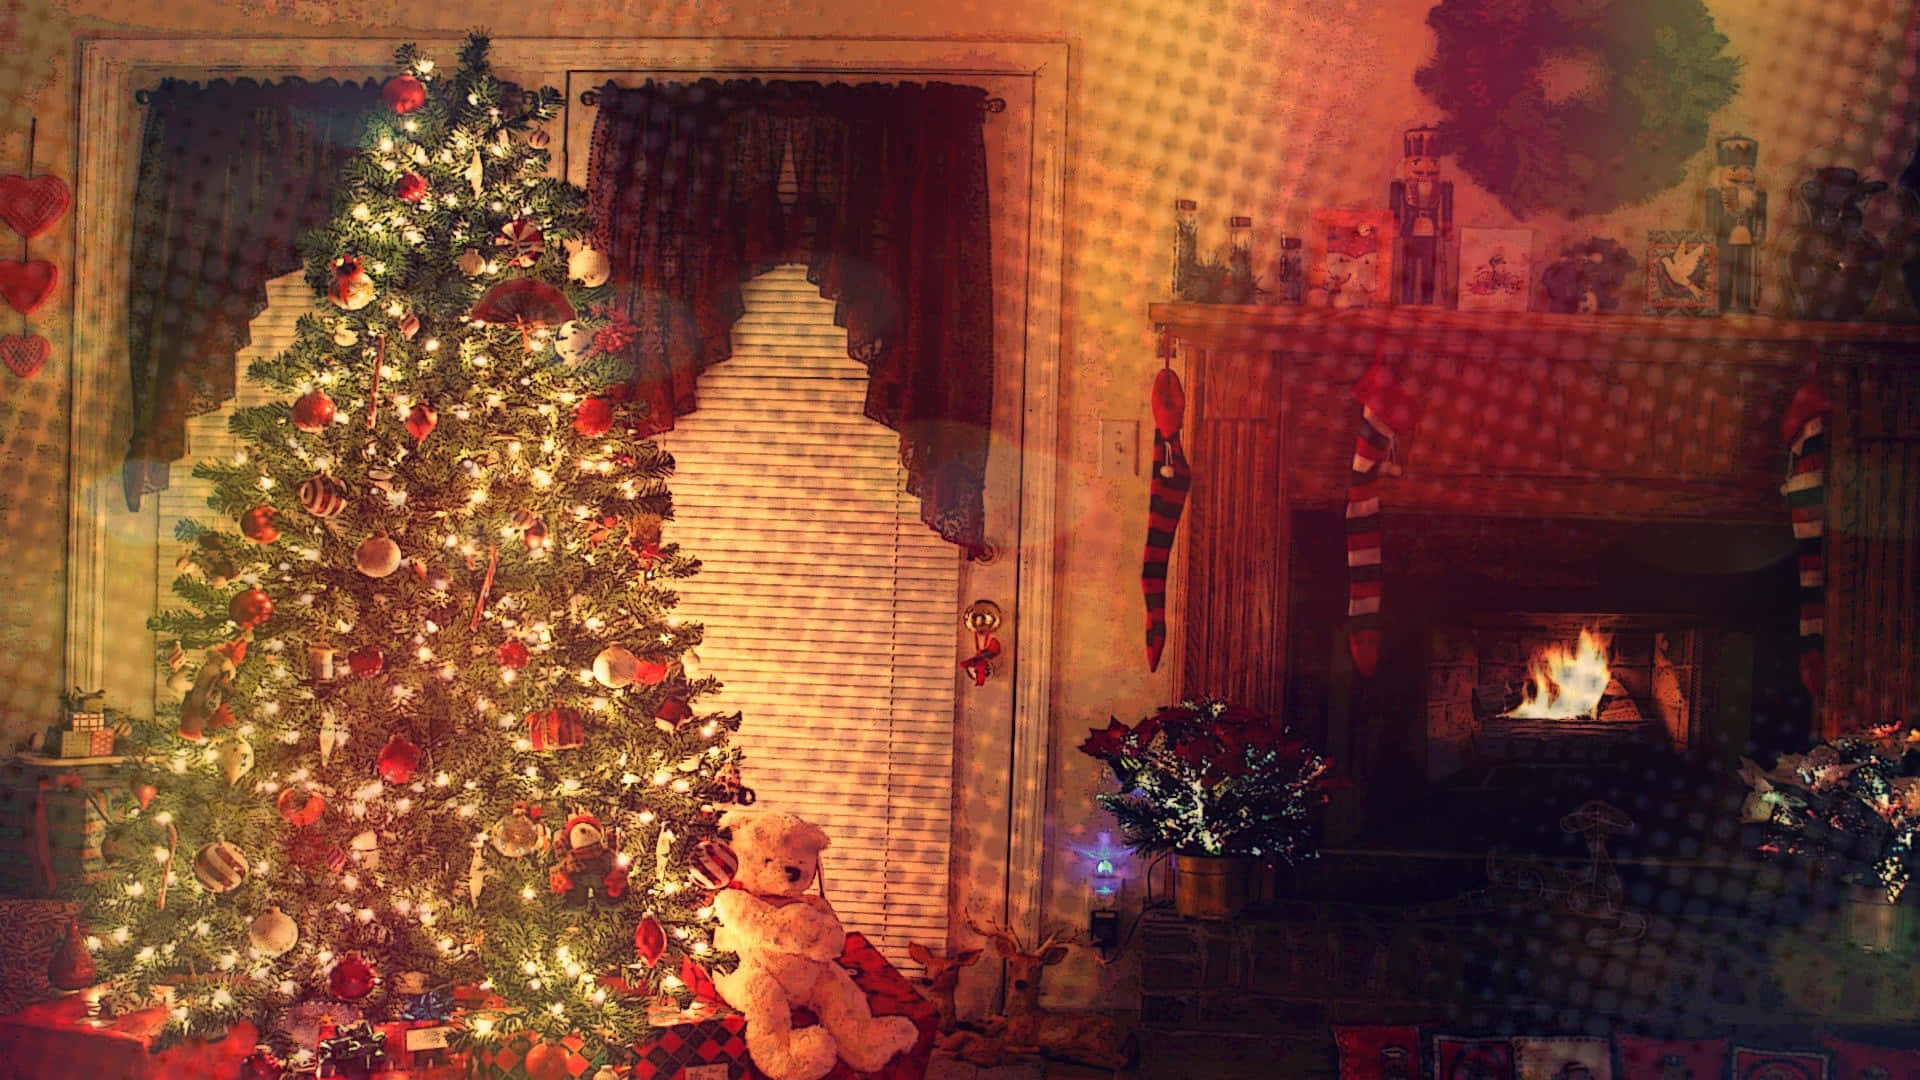 Share A Cozy Christmas With Your Loved Ones Wallpaper